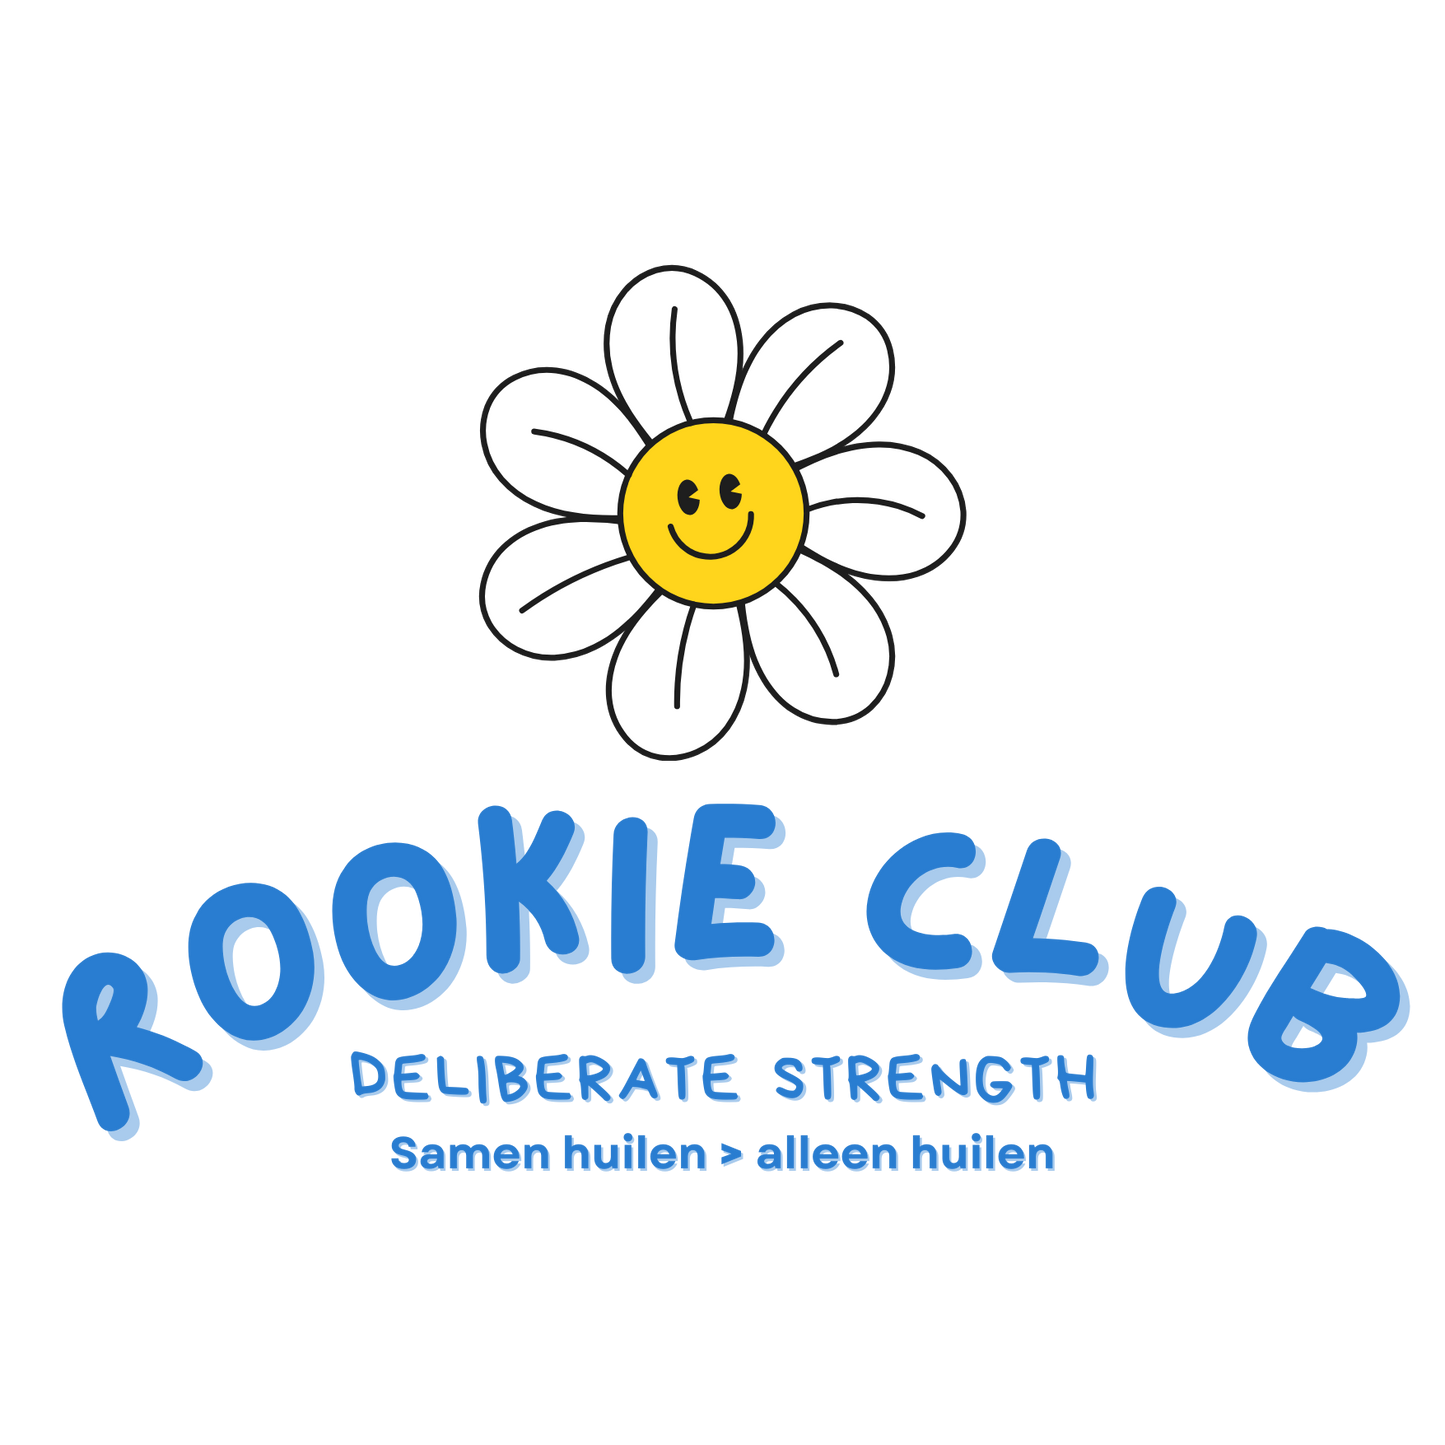 Deliberate Strength - Rookie Club